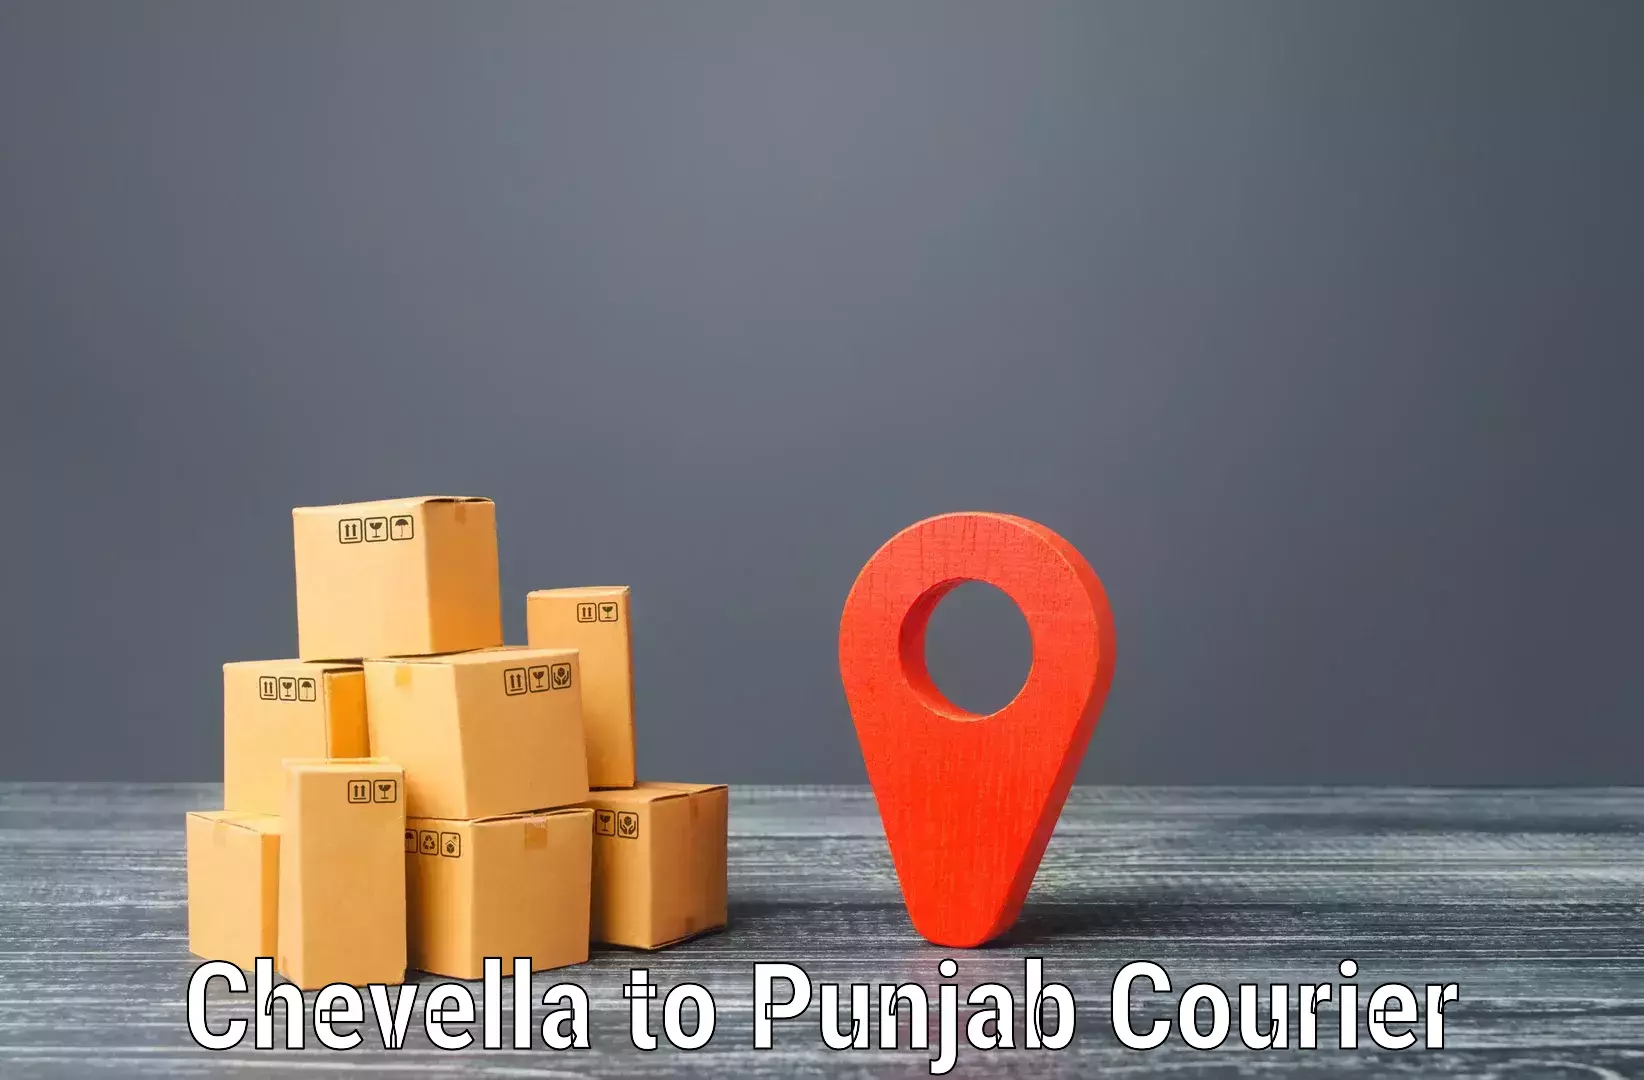 Sustainable shipping practices Chevella to Mohali